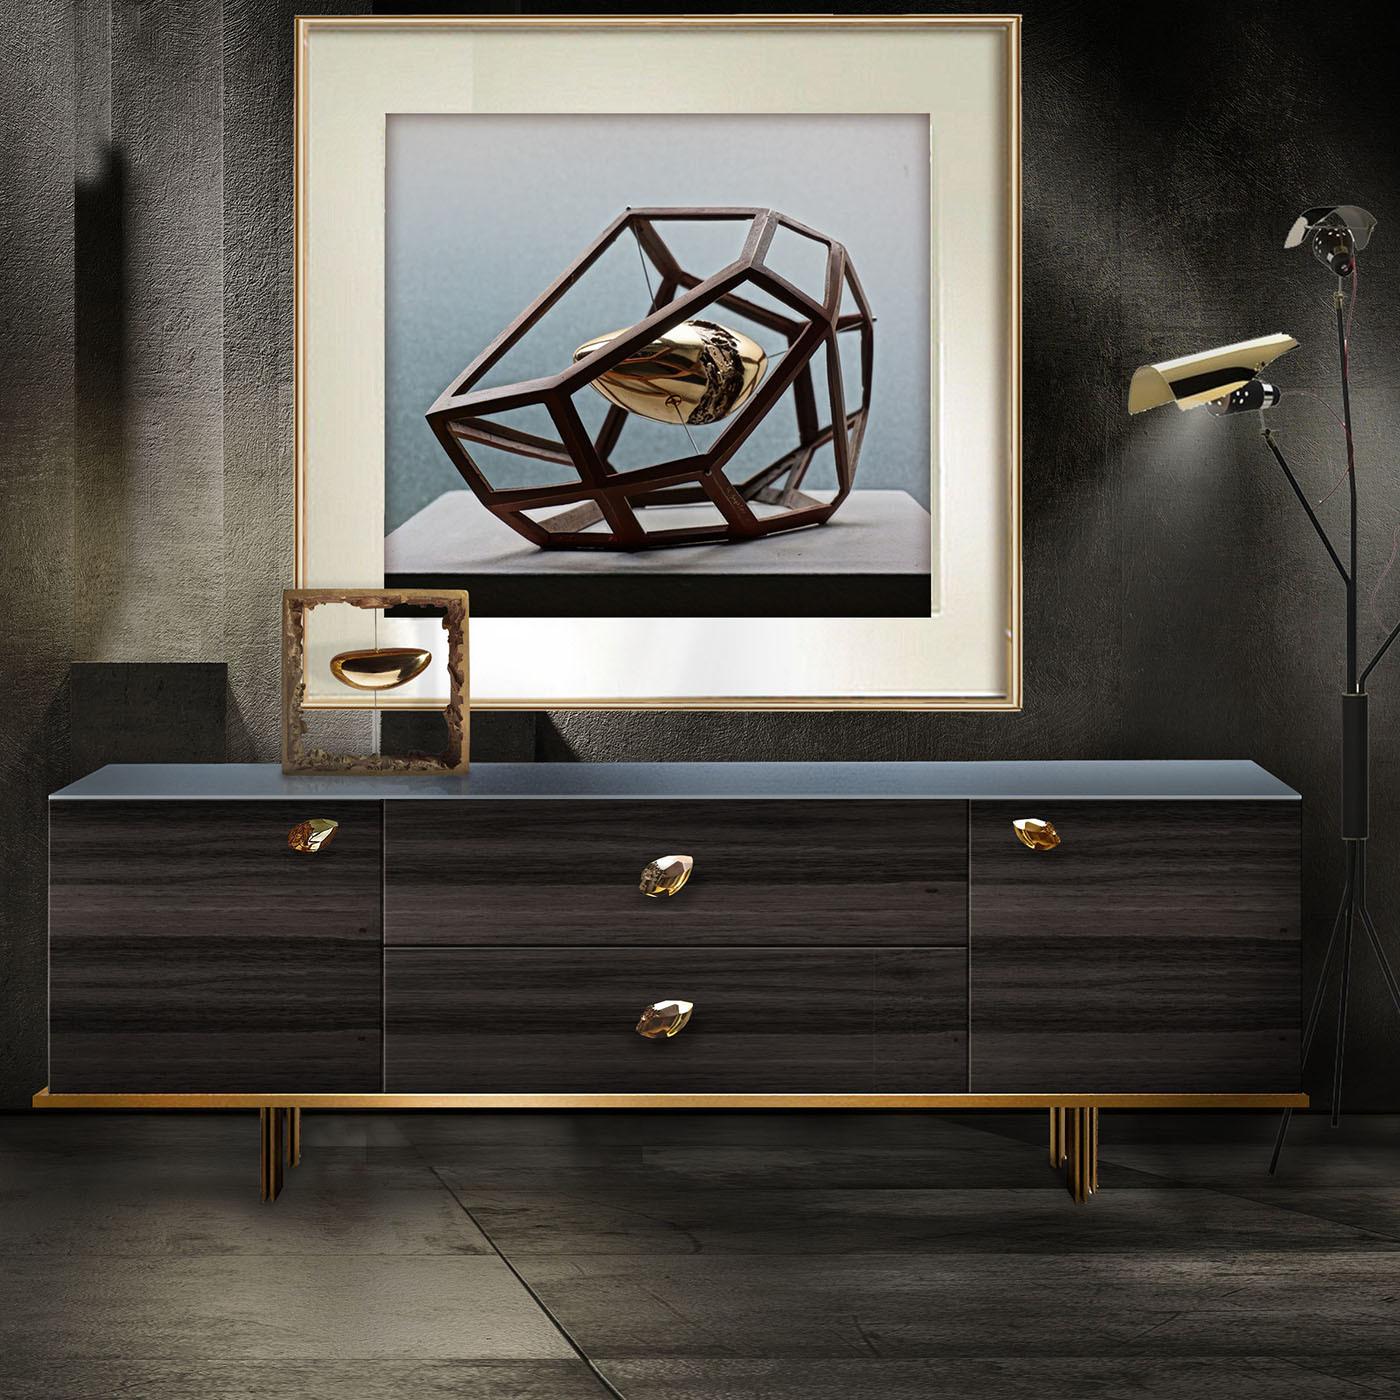 This Exhibition Sideboard showcases a visually captivating decoration hand-painted by the artist Kyoji Nagatani. In a stylish and simple contemporary design, this sideboard designed by Giuliano Cappelleti will add flair to your dining room or living